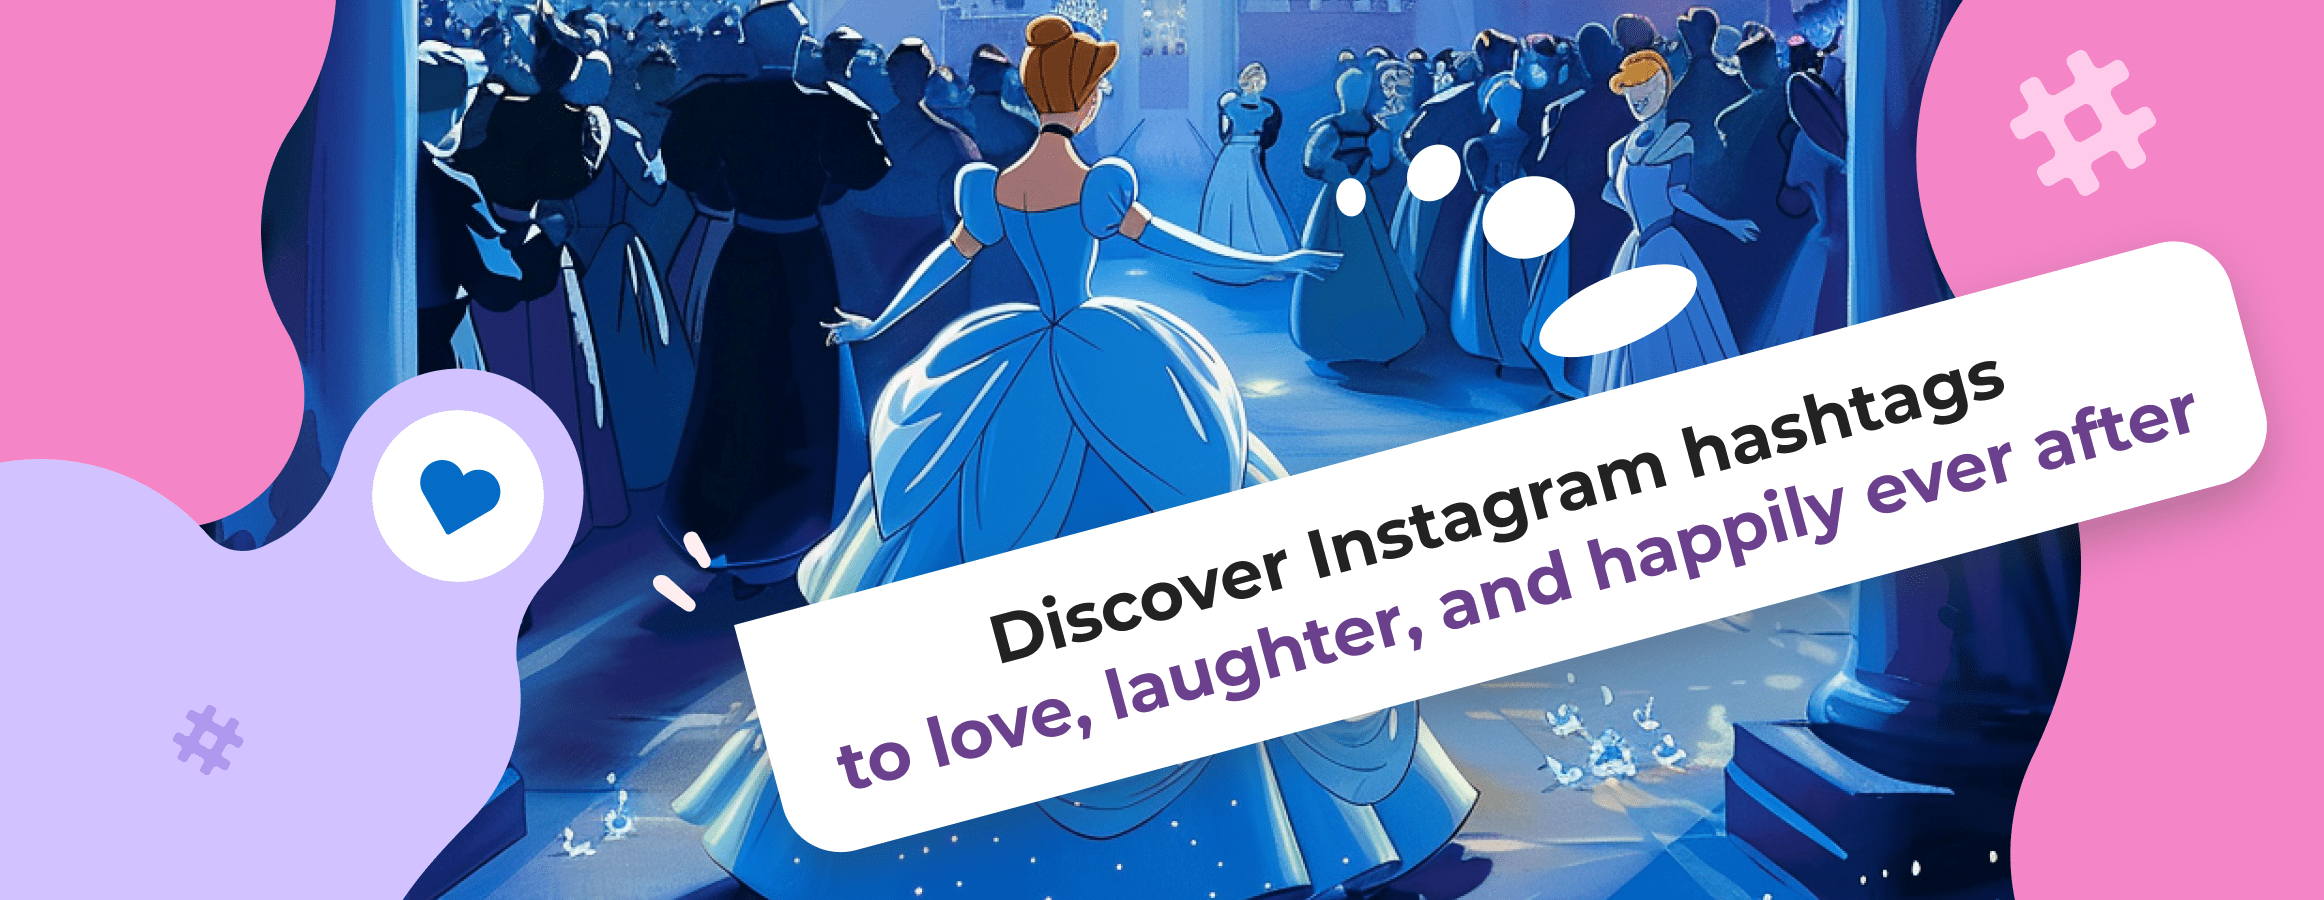 Ace Your Big Day With the Best Instagram Wedding Hashtags.png